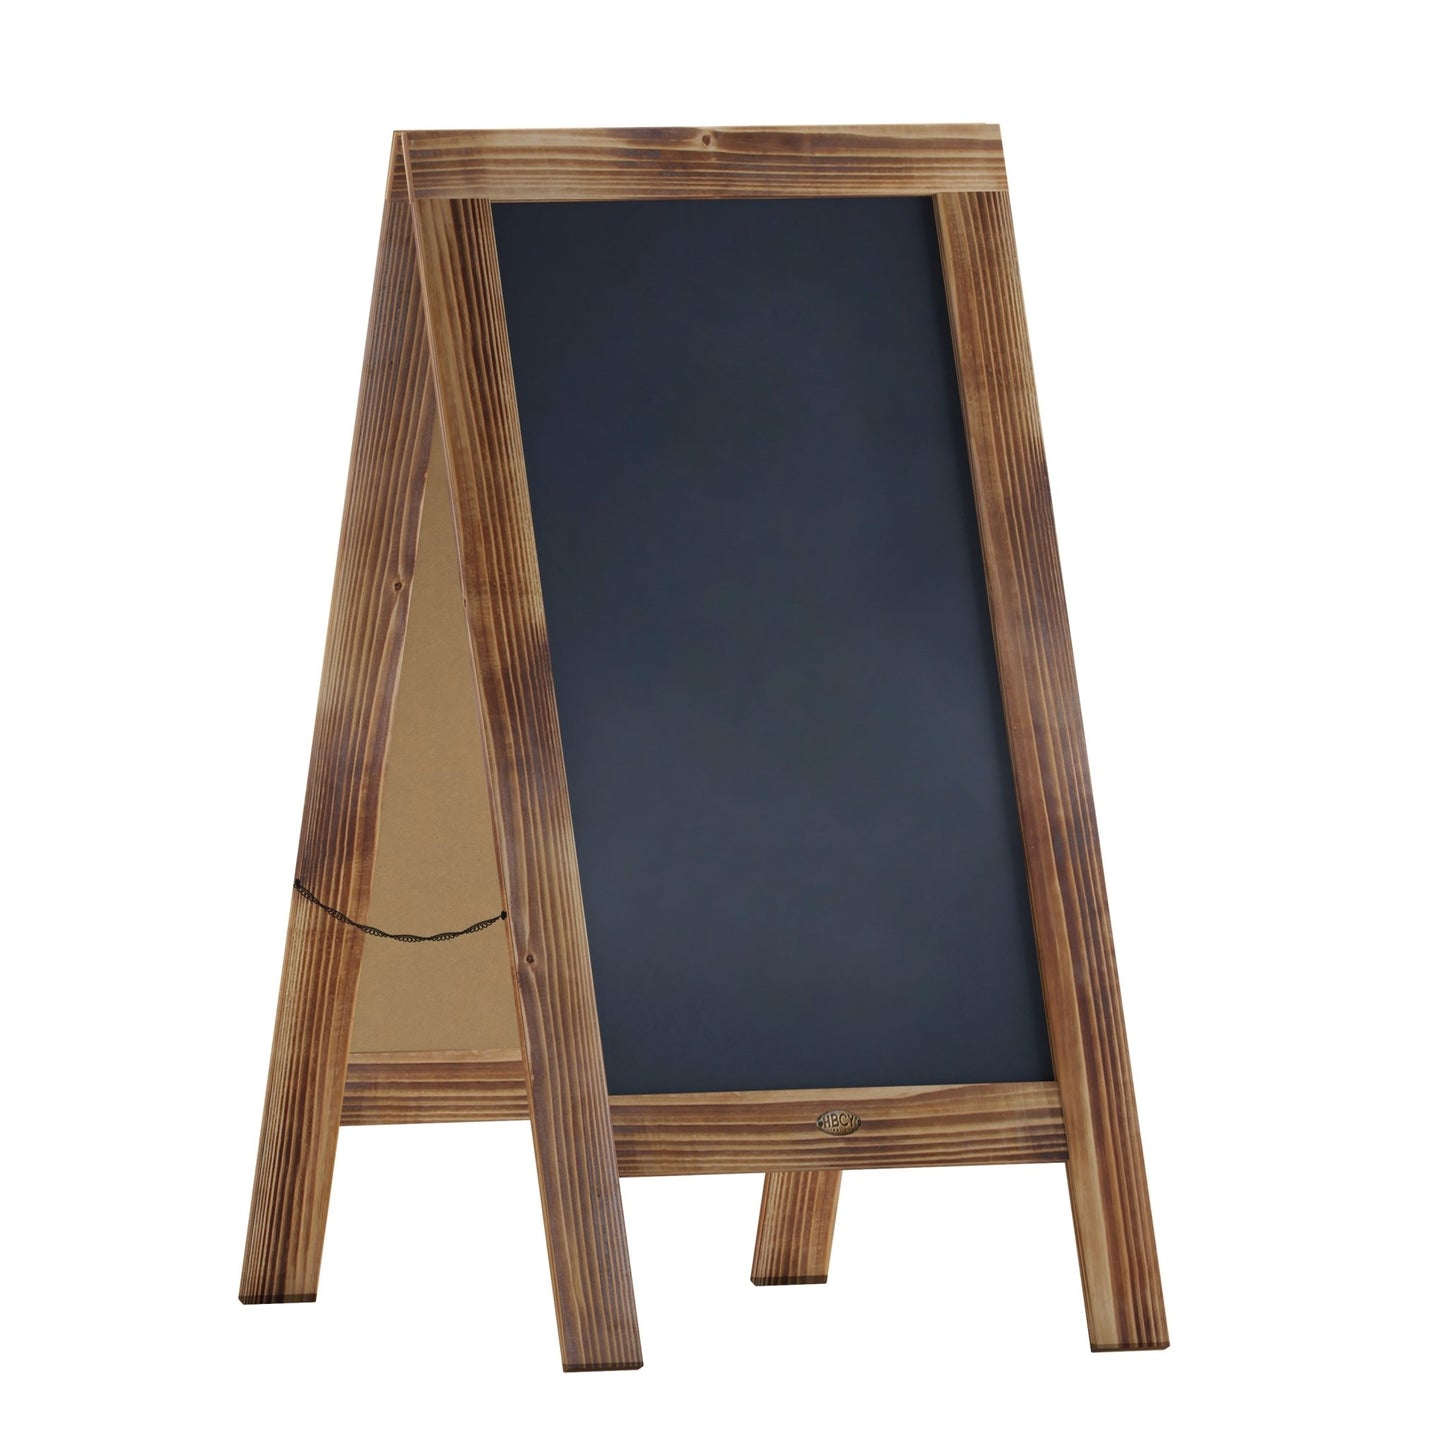 Canterbury 40" x 20" Vintage Wooden A-Frame Magnetic Indoor/Outdoor Chalkboard Sign, Freestanding Double Sided Extra Large Message Board, Black - SchoolOutlet